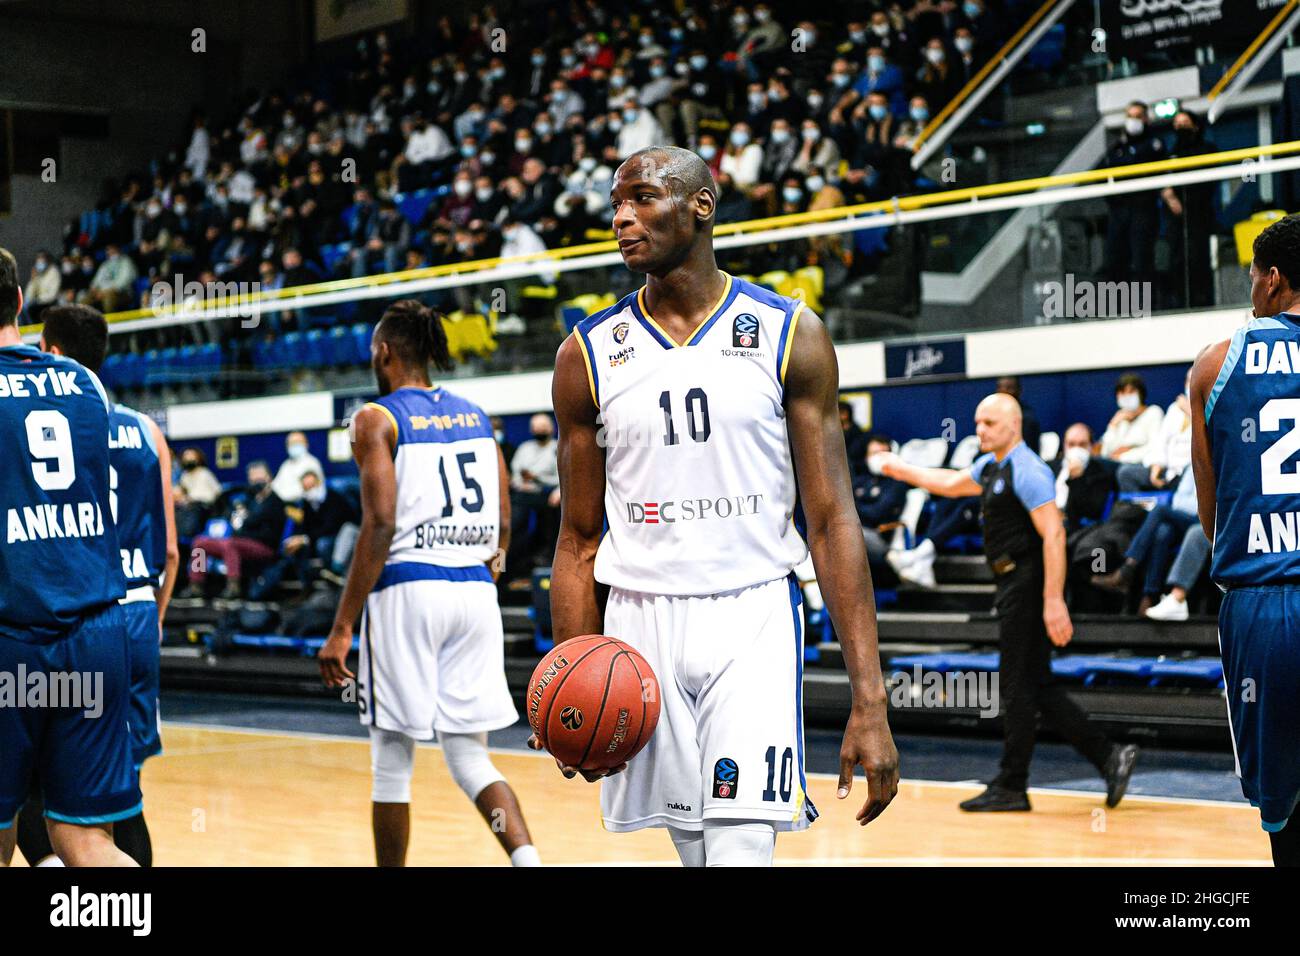 Bandja Sy of Metropolitans 92 during the 7DAYS EuroCup basketball